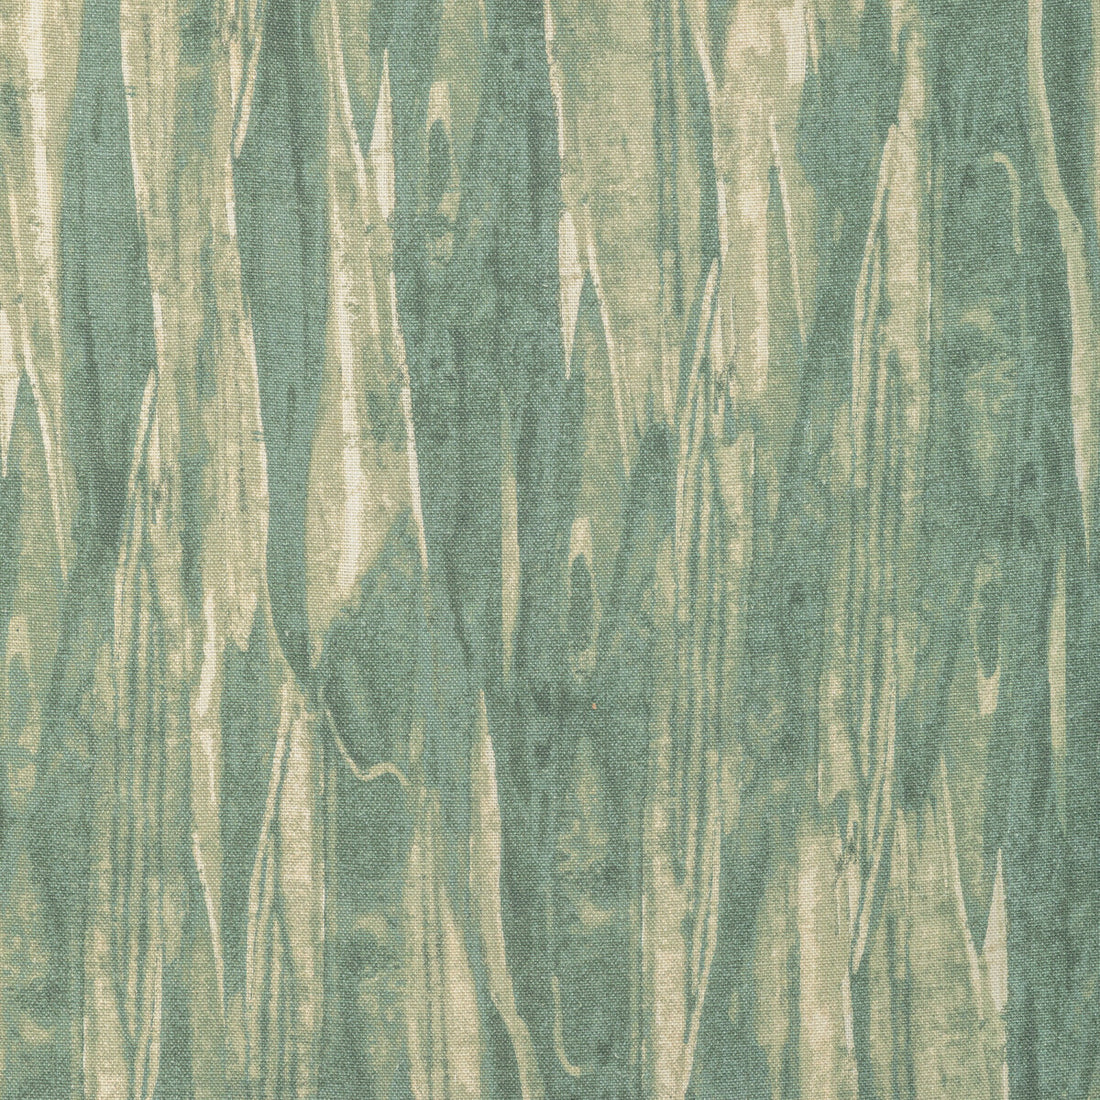 Drybrush fabric in agave color - pattern DRYBRUSH.130.0 - by Kravet Couture in the Barbara Barry Ojai collection